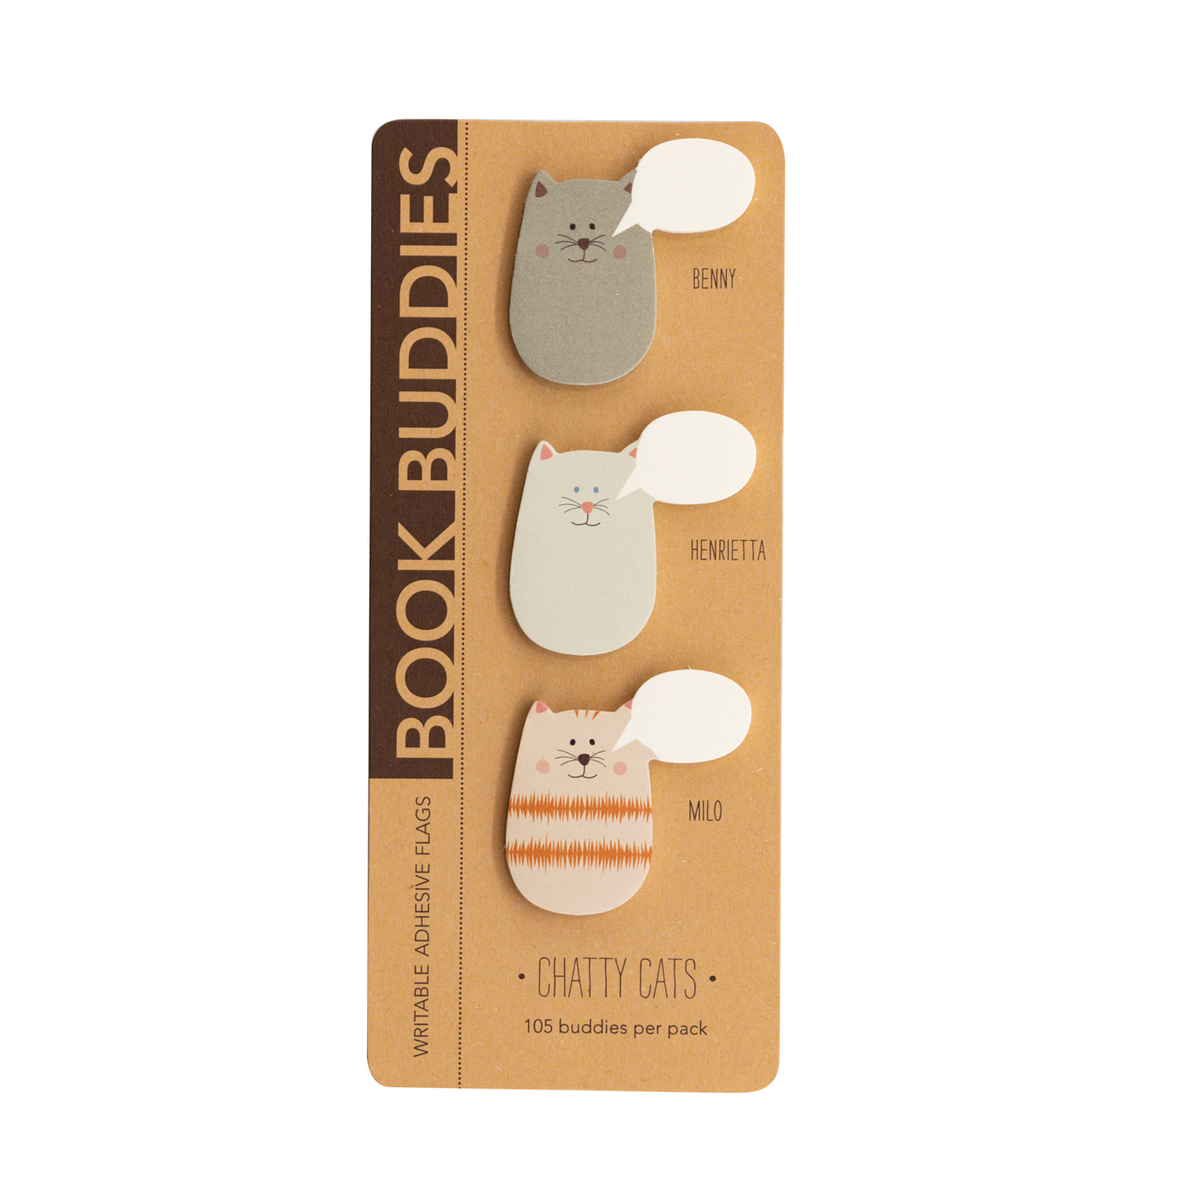 Girl of ALL WORK - Book Buddies - Adhesive flags - Chatty Cats